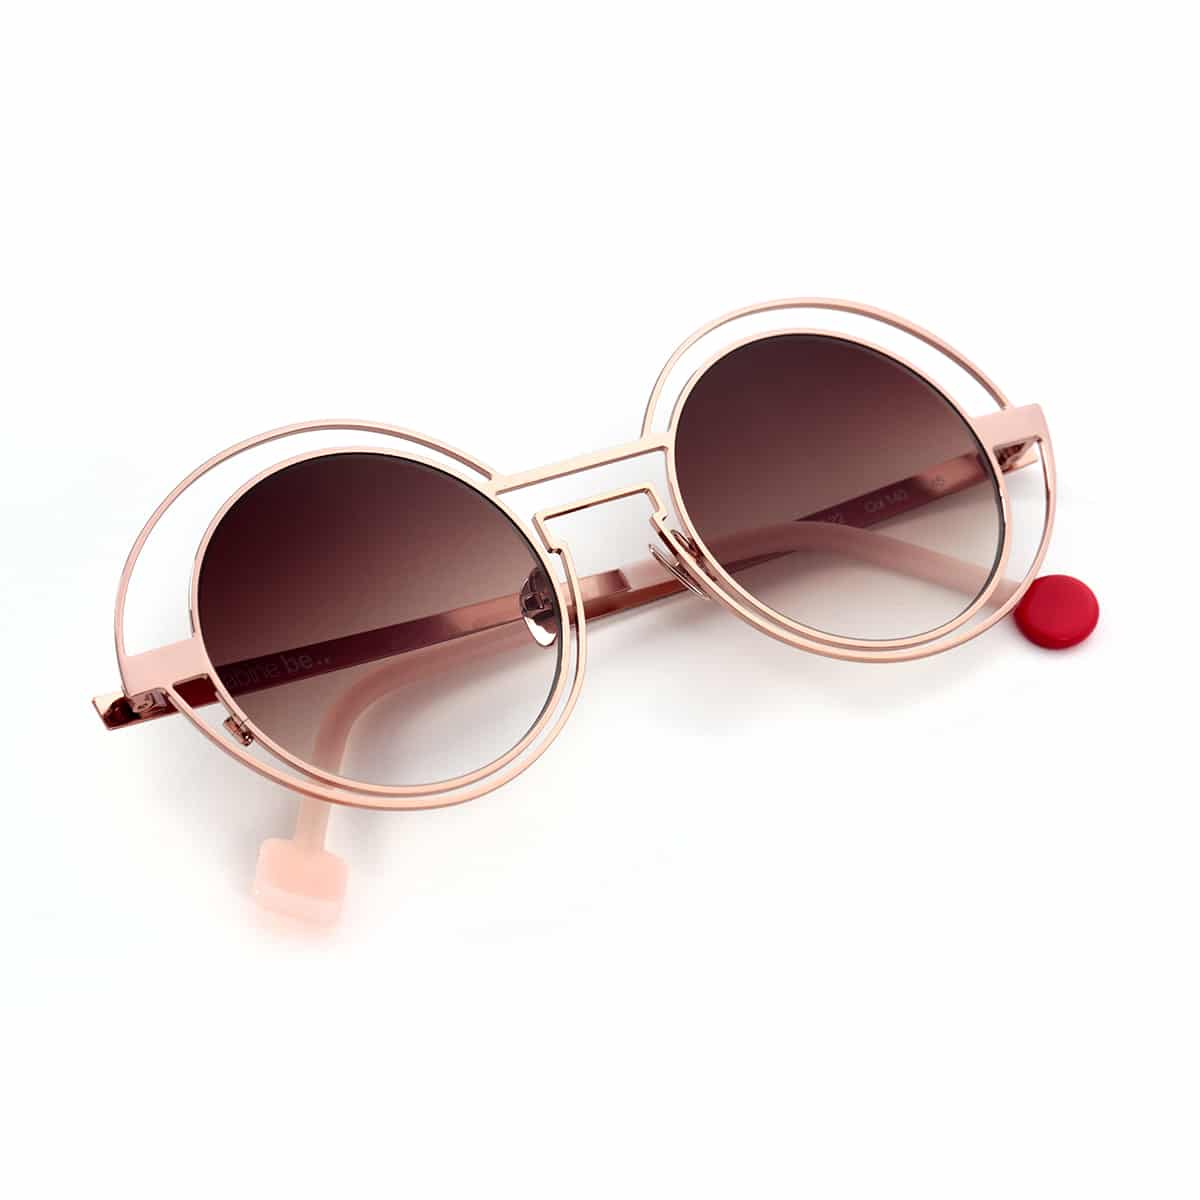 Sabine Be™ Be Val de Loire Wire Sun 140 50 - Polished Rose Gold
